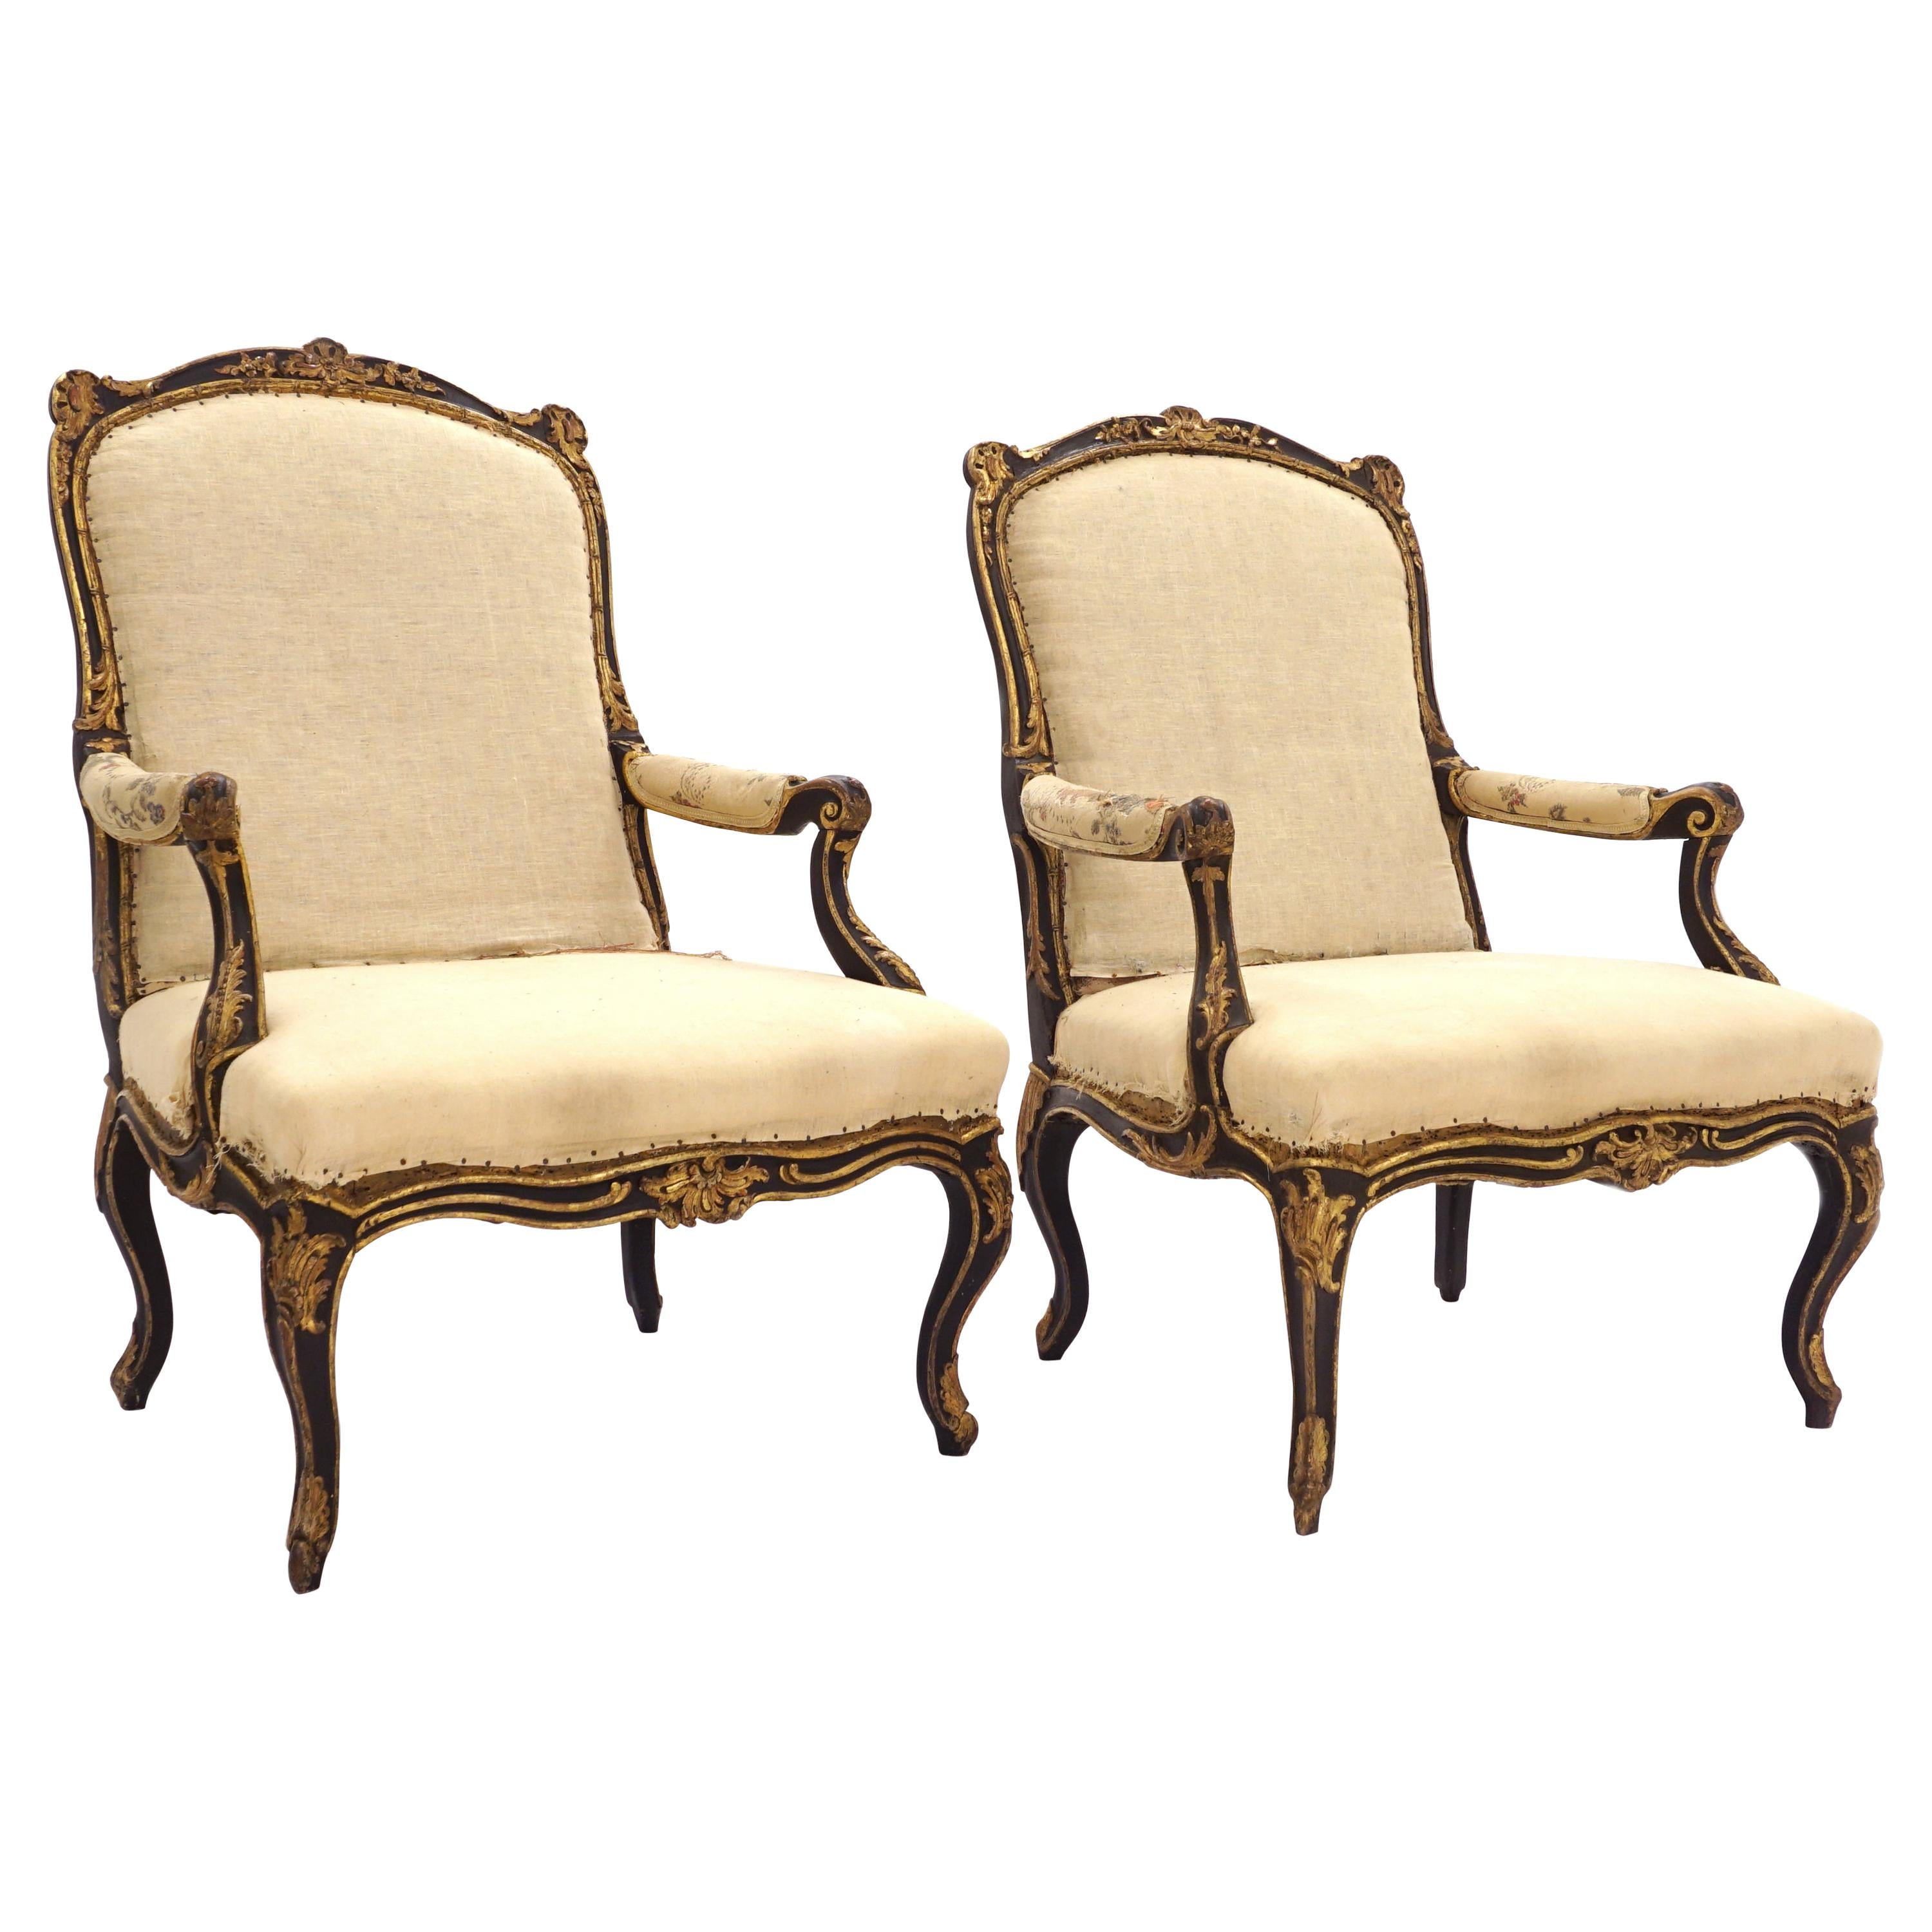 Impressive Pair of French Mid 18th Century Black and Gilt Rococo Armchairs For Sale